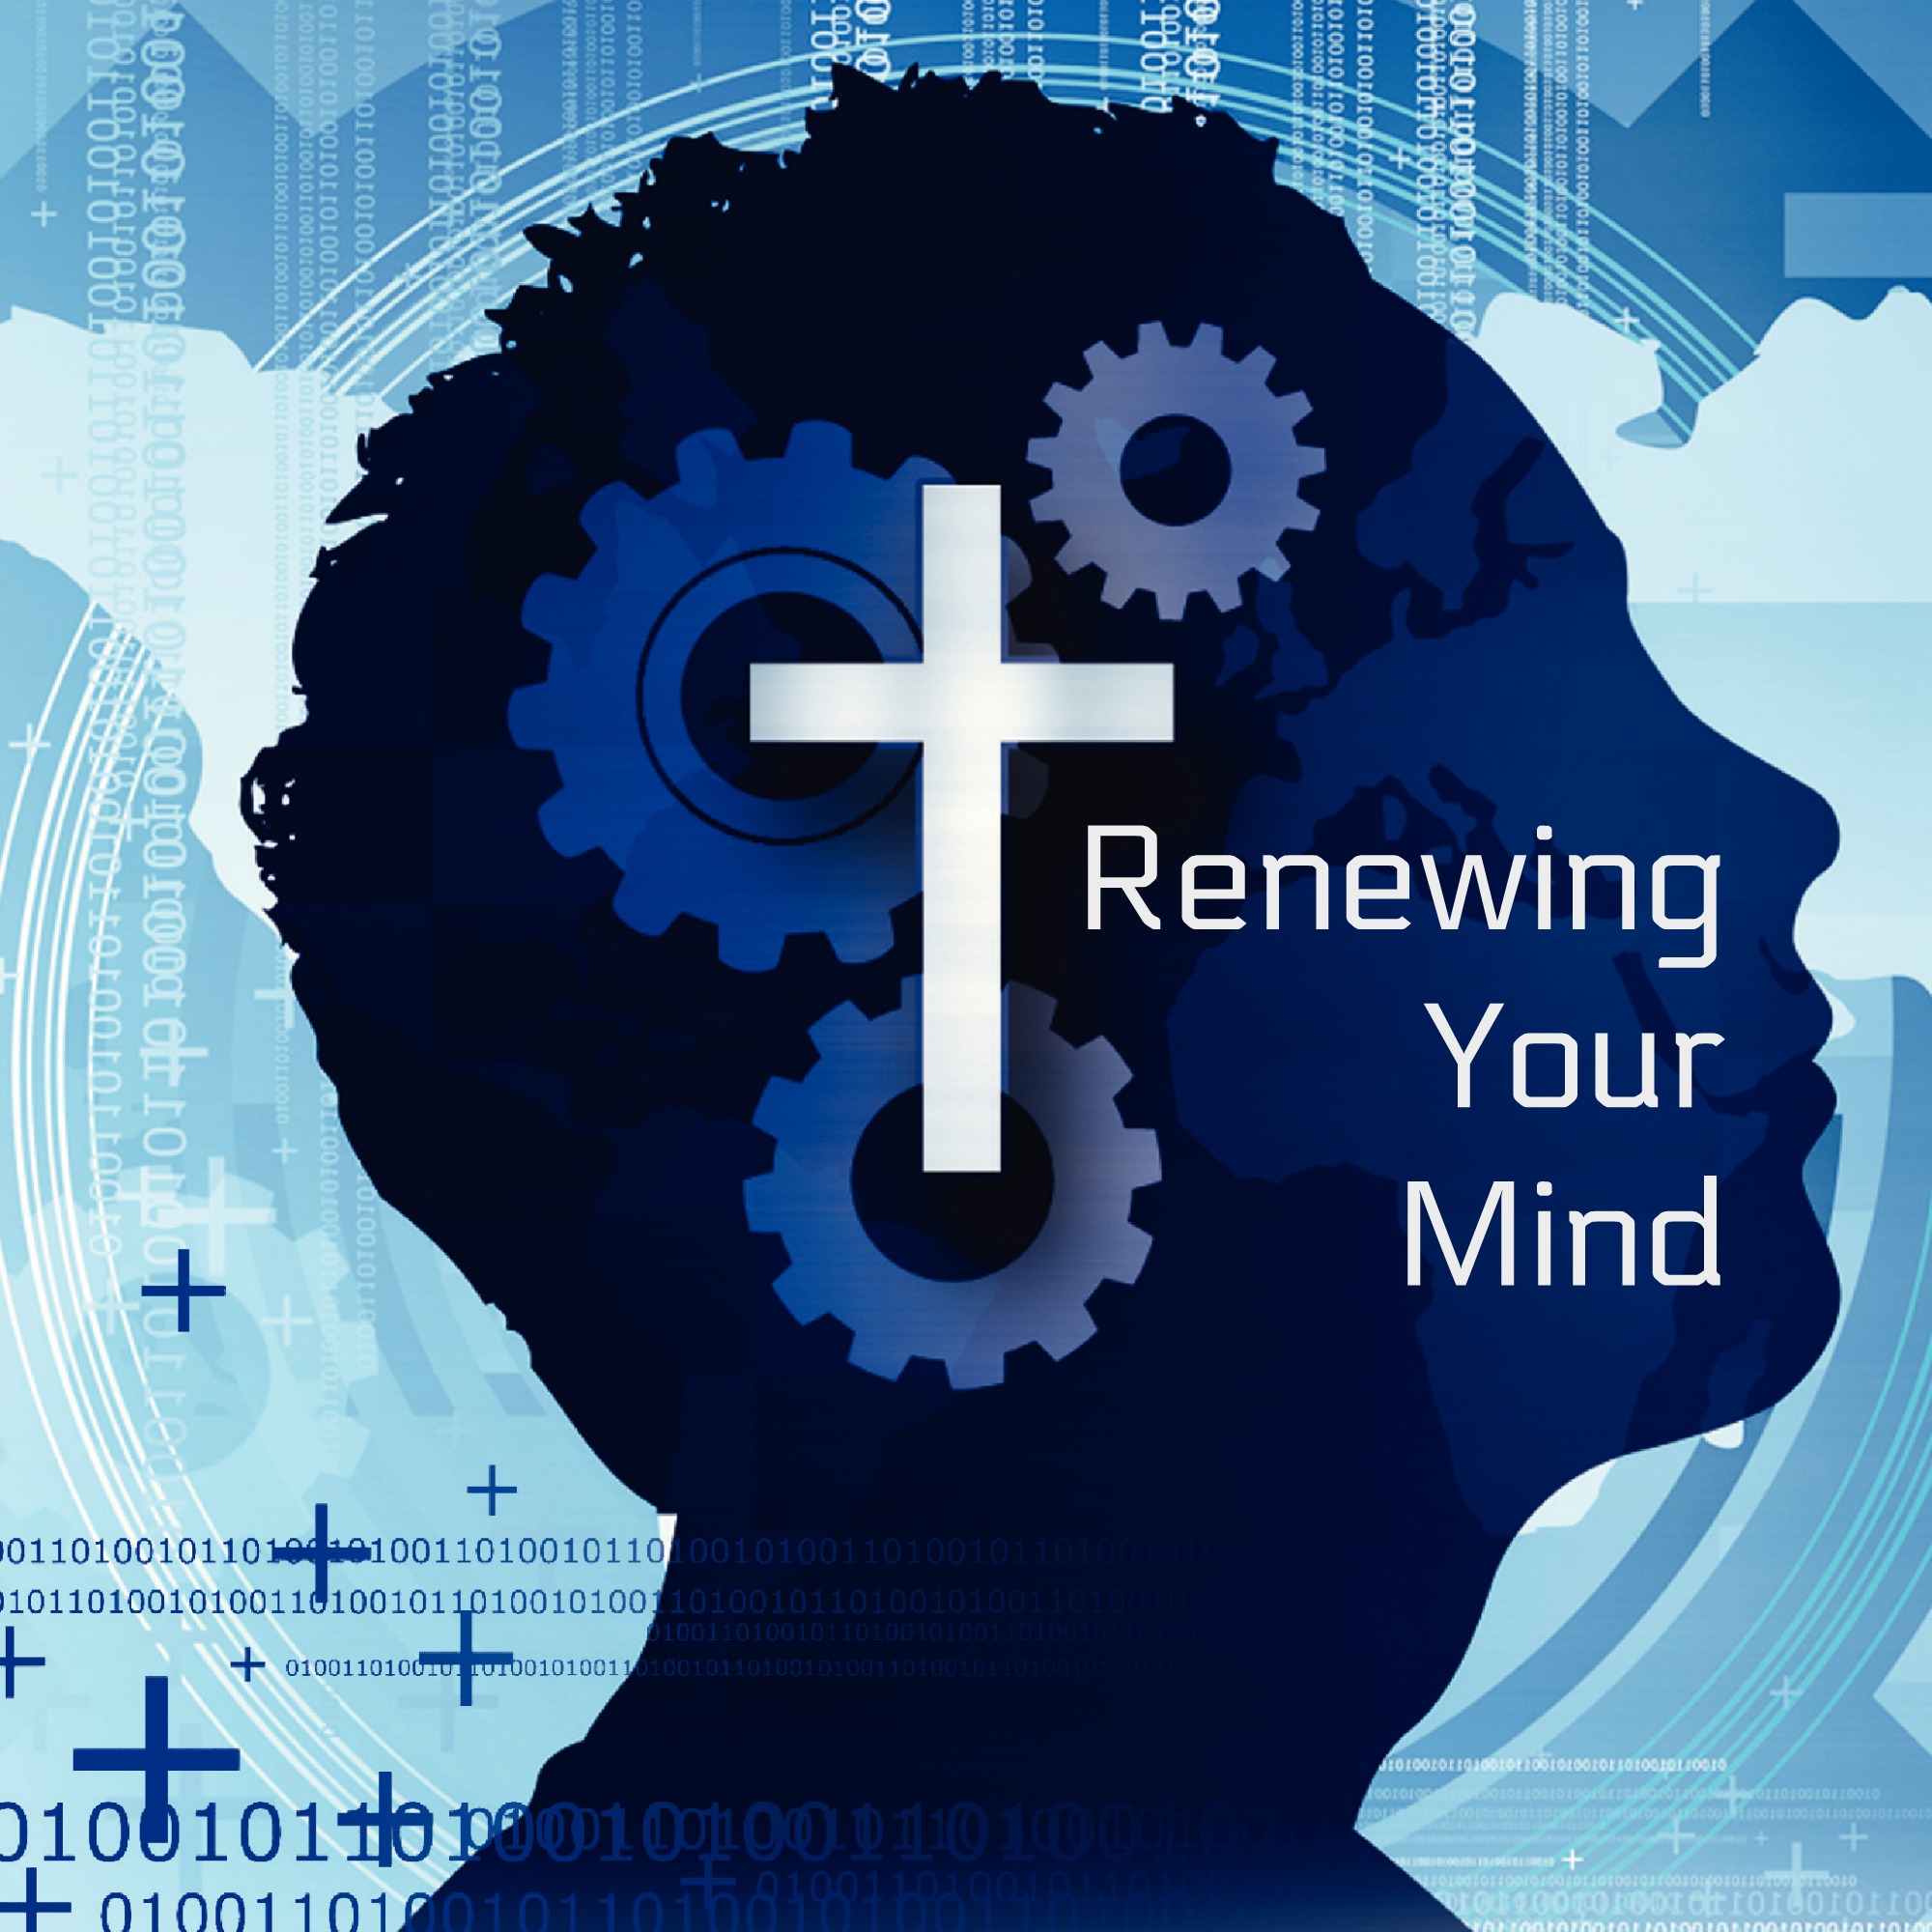 Renewing Your Mind 